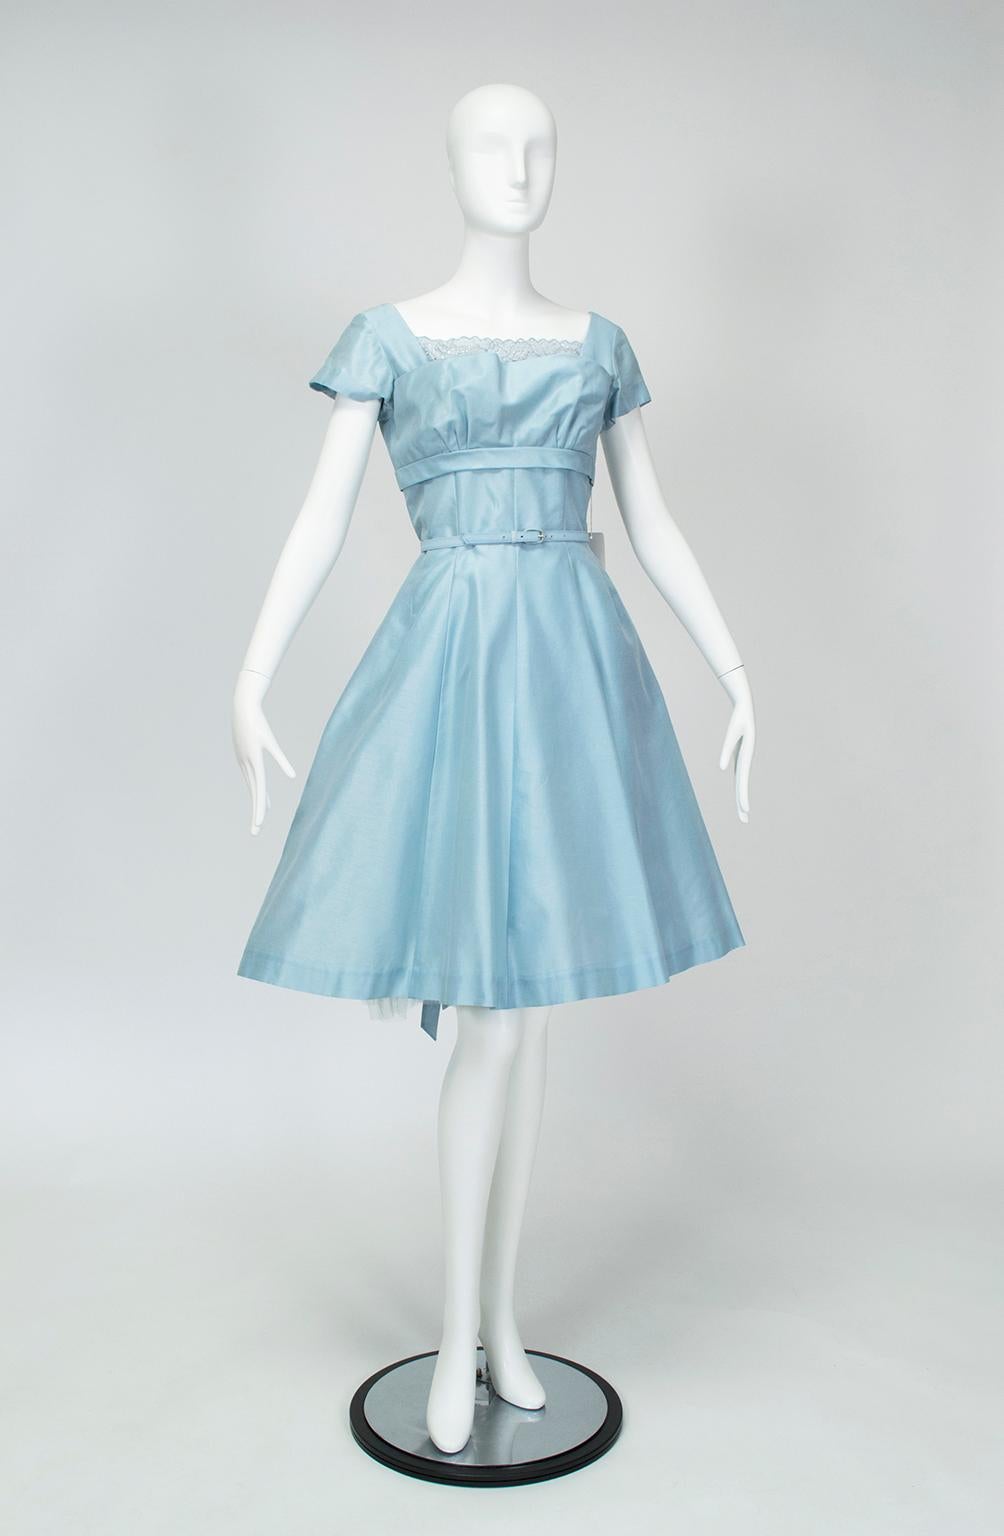 A honeymoon dress that was never worn (because the groom shipped out to Korea immediately after the wedding), this dress is the pinnacle of femininity. Oozing with propriety, from its petal-gathered shelf bust to its attached crinoline.

Short